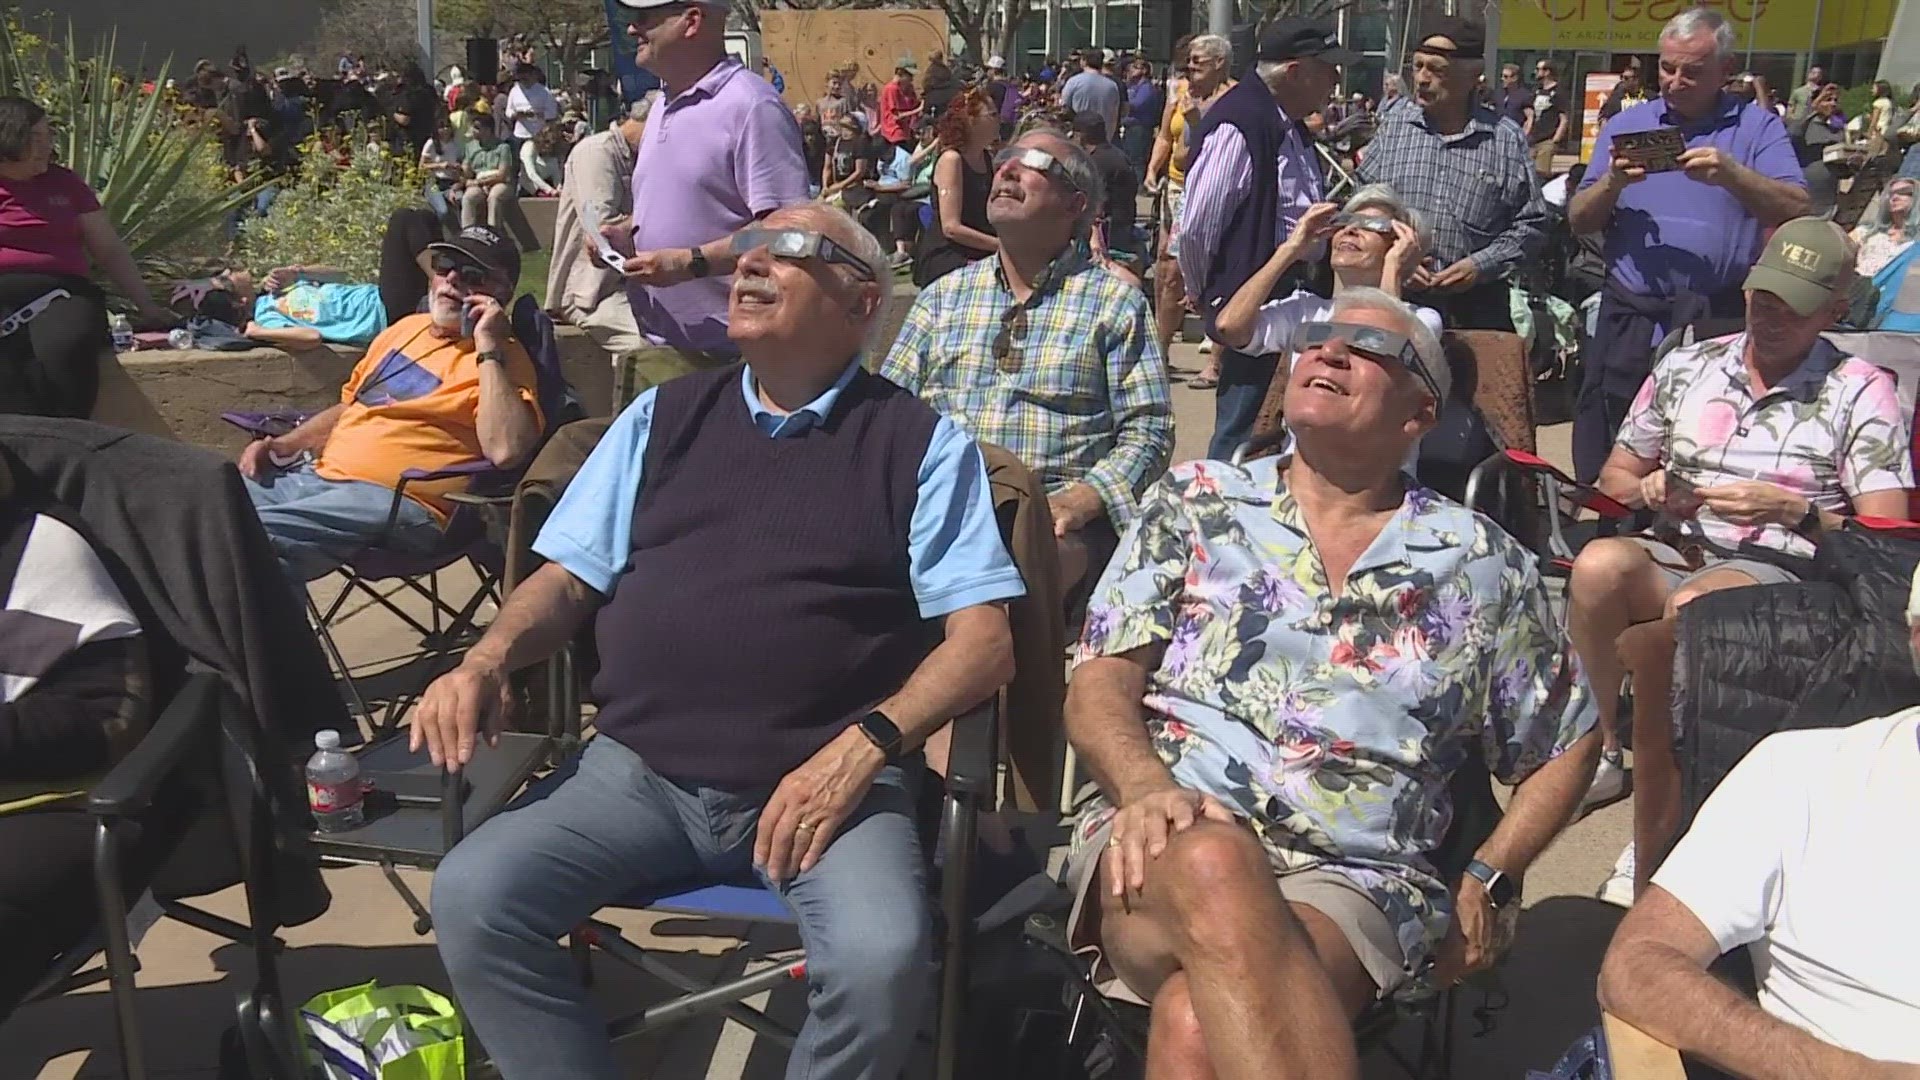 Space enthusiasts of all ages were able to enjoy the eclipse on Monday in Phoenix.